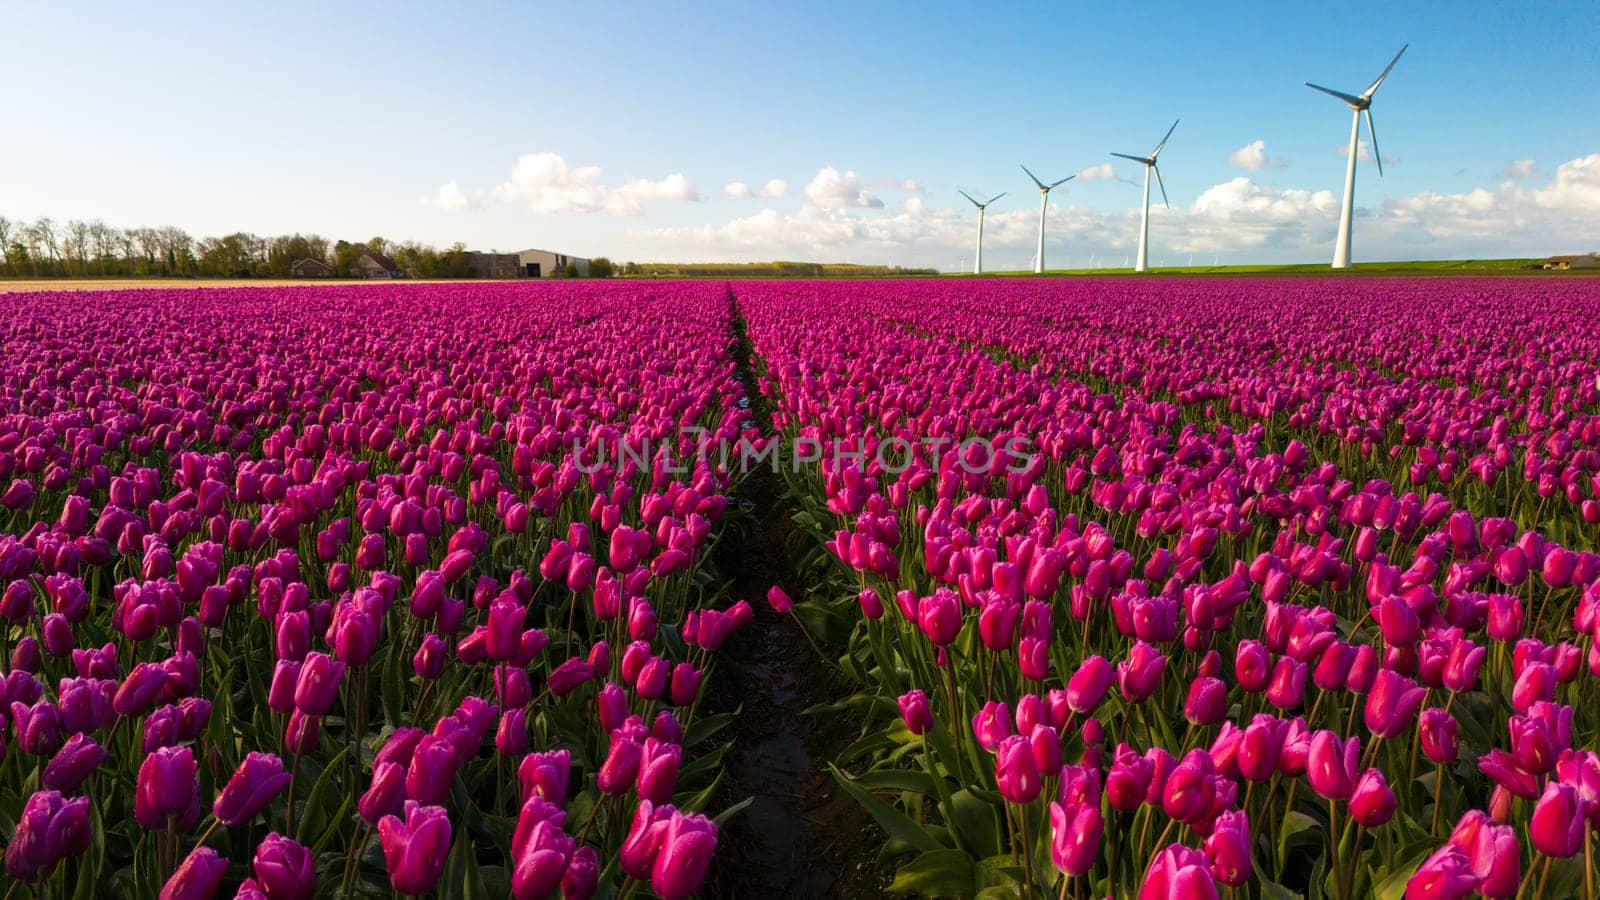 A vibrant field of purple tulips stretches out towards a row of iconic Dutch windmills on a sunny Spring day. windmill turbines in the Noordoostpolder Netherlands